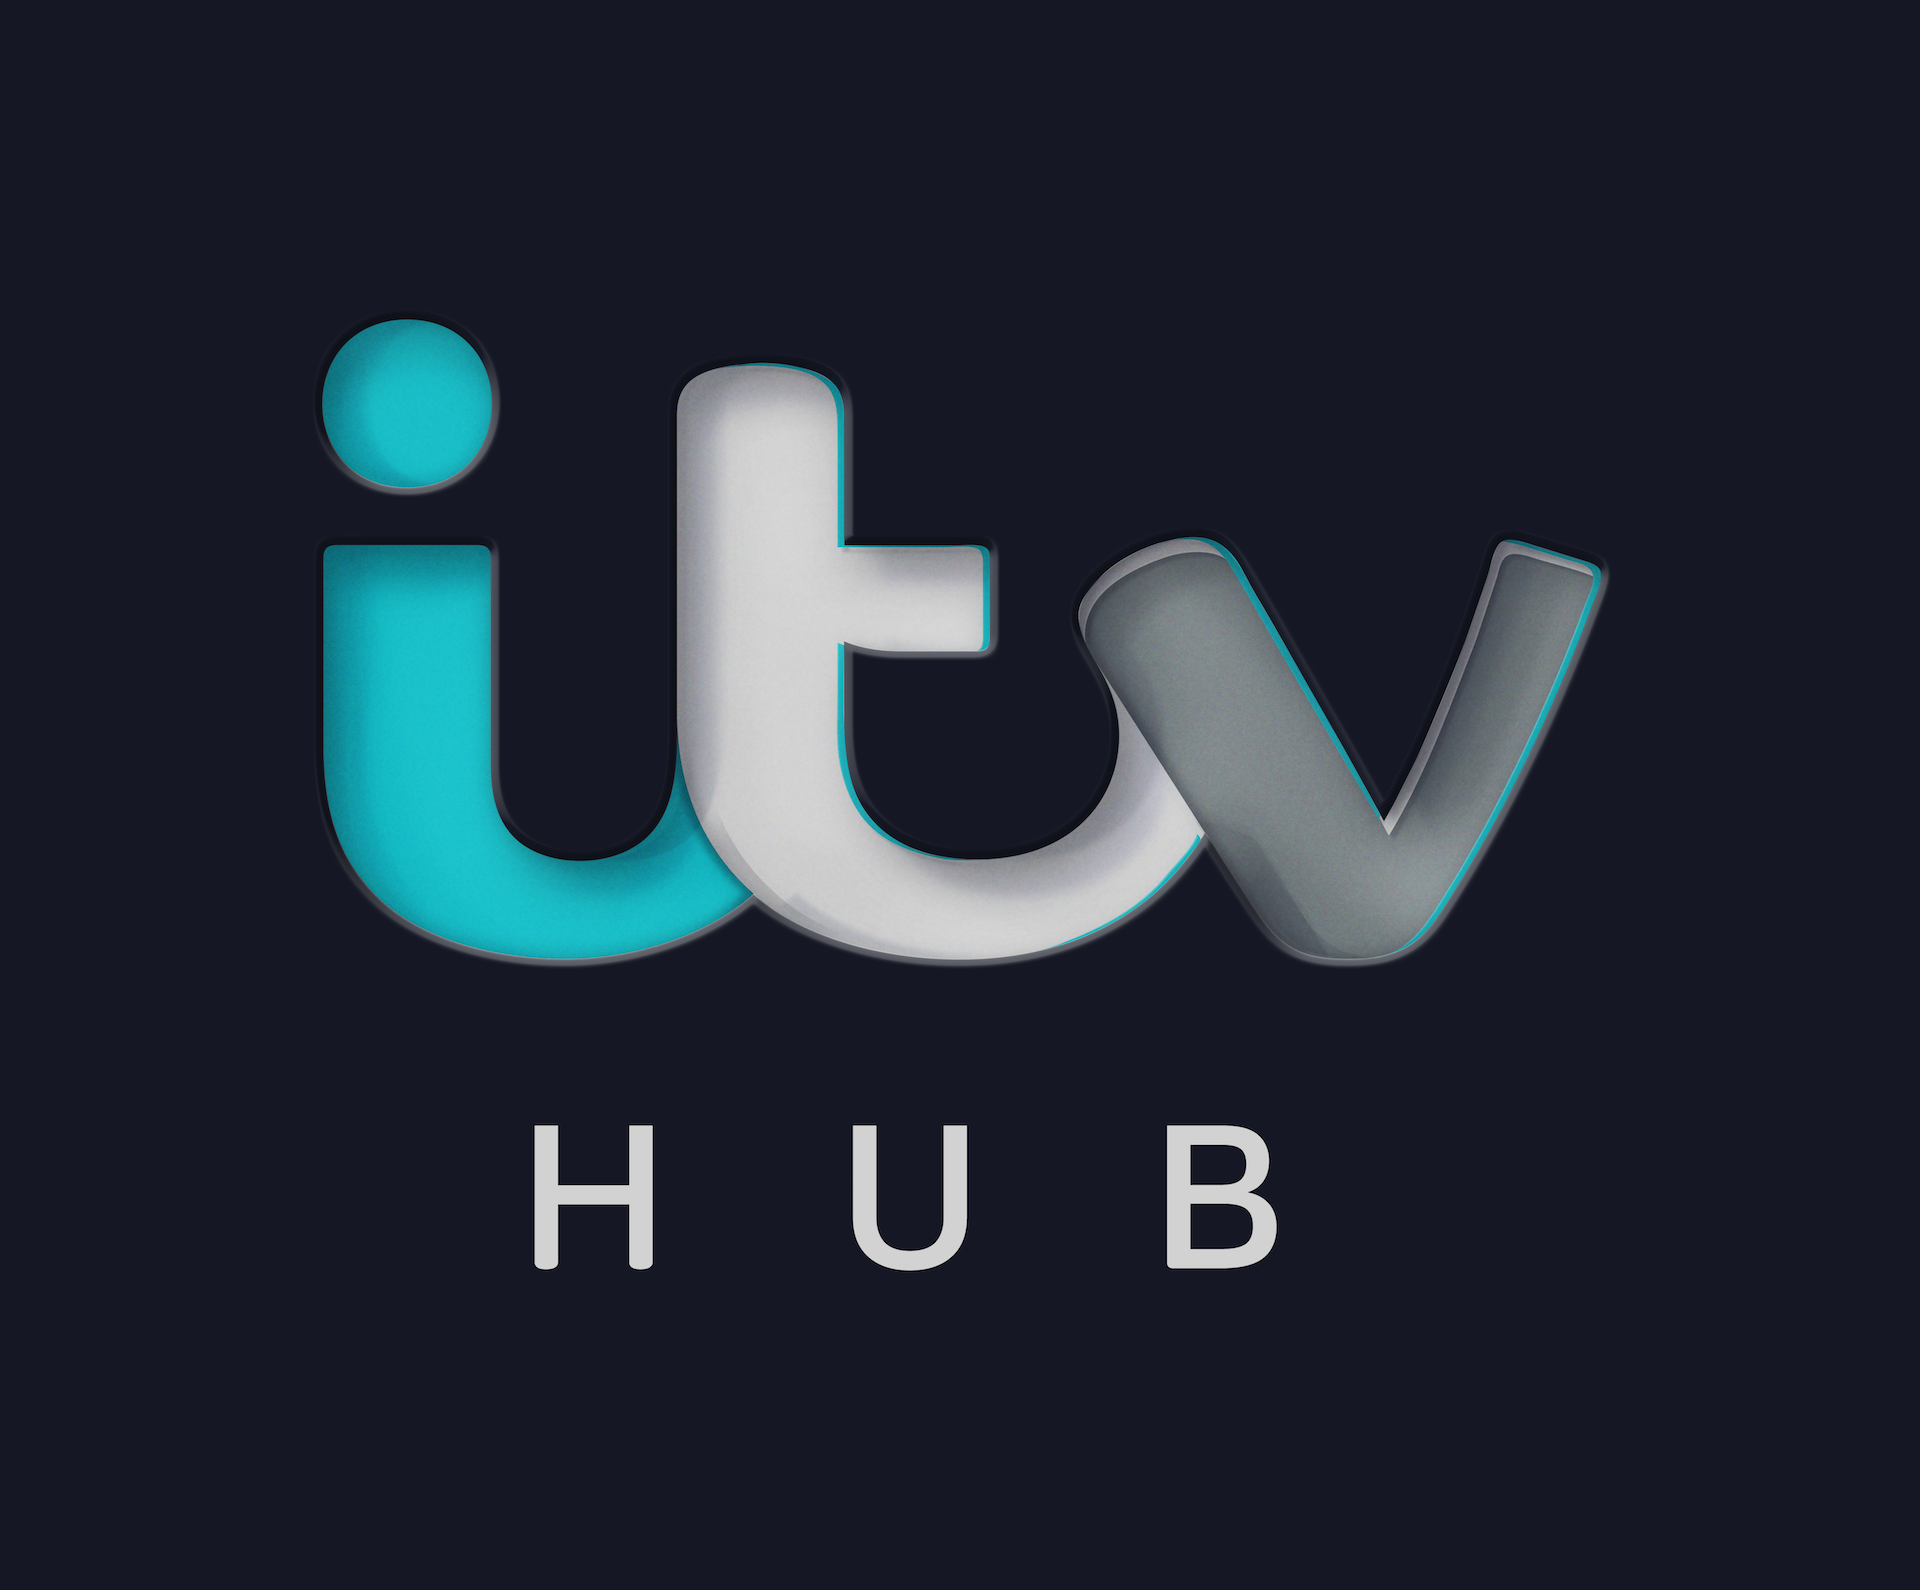 How do you connect to itv hub